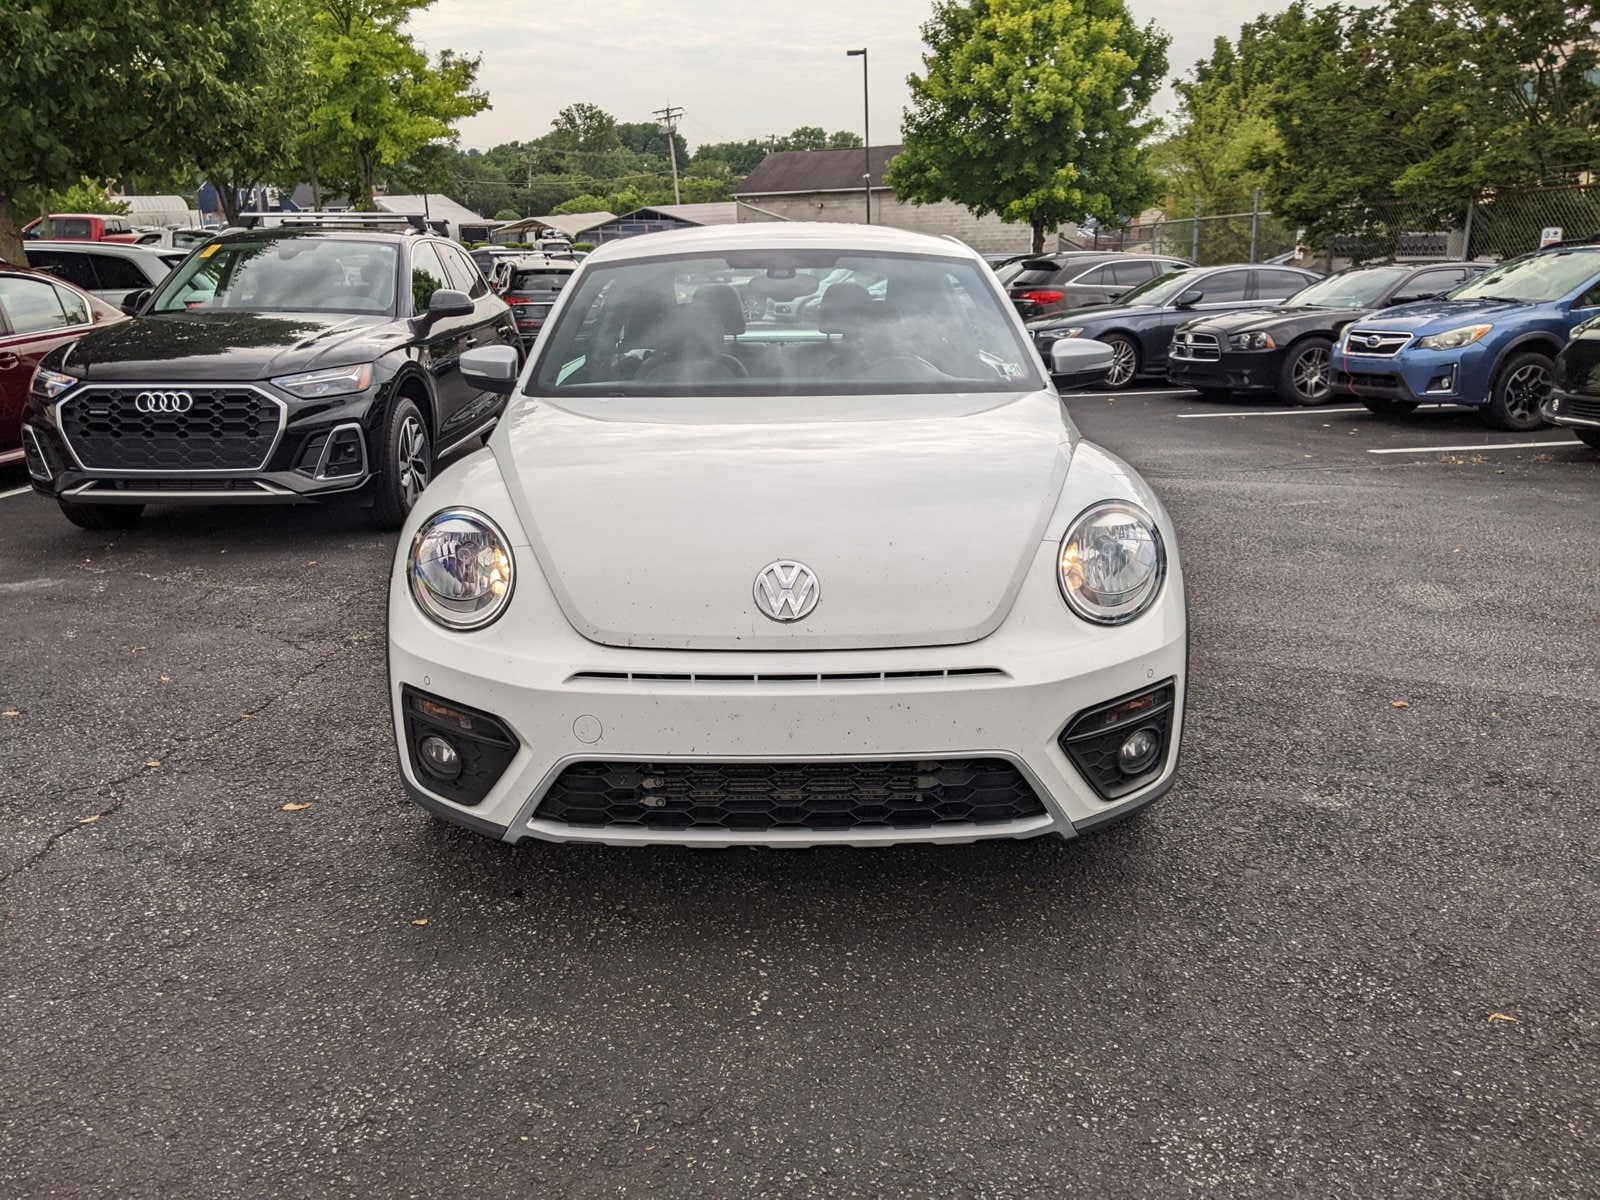 Used 2016 Volkswagen Beetle Dune with VIN 3VWS17AT0GM631679 for sale in Cockeysville, MD